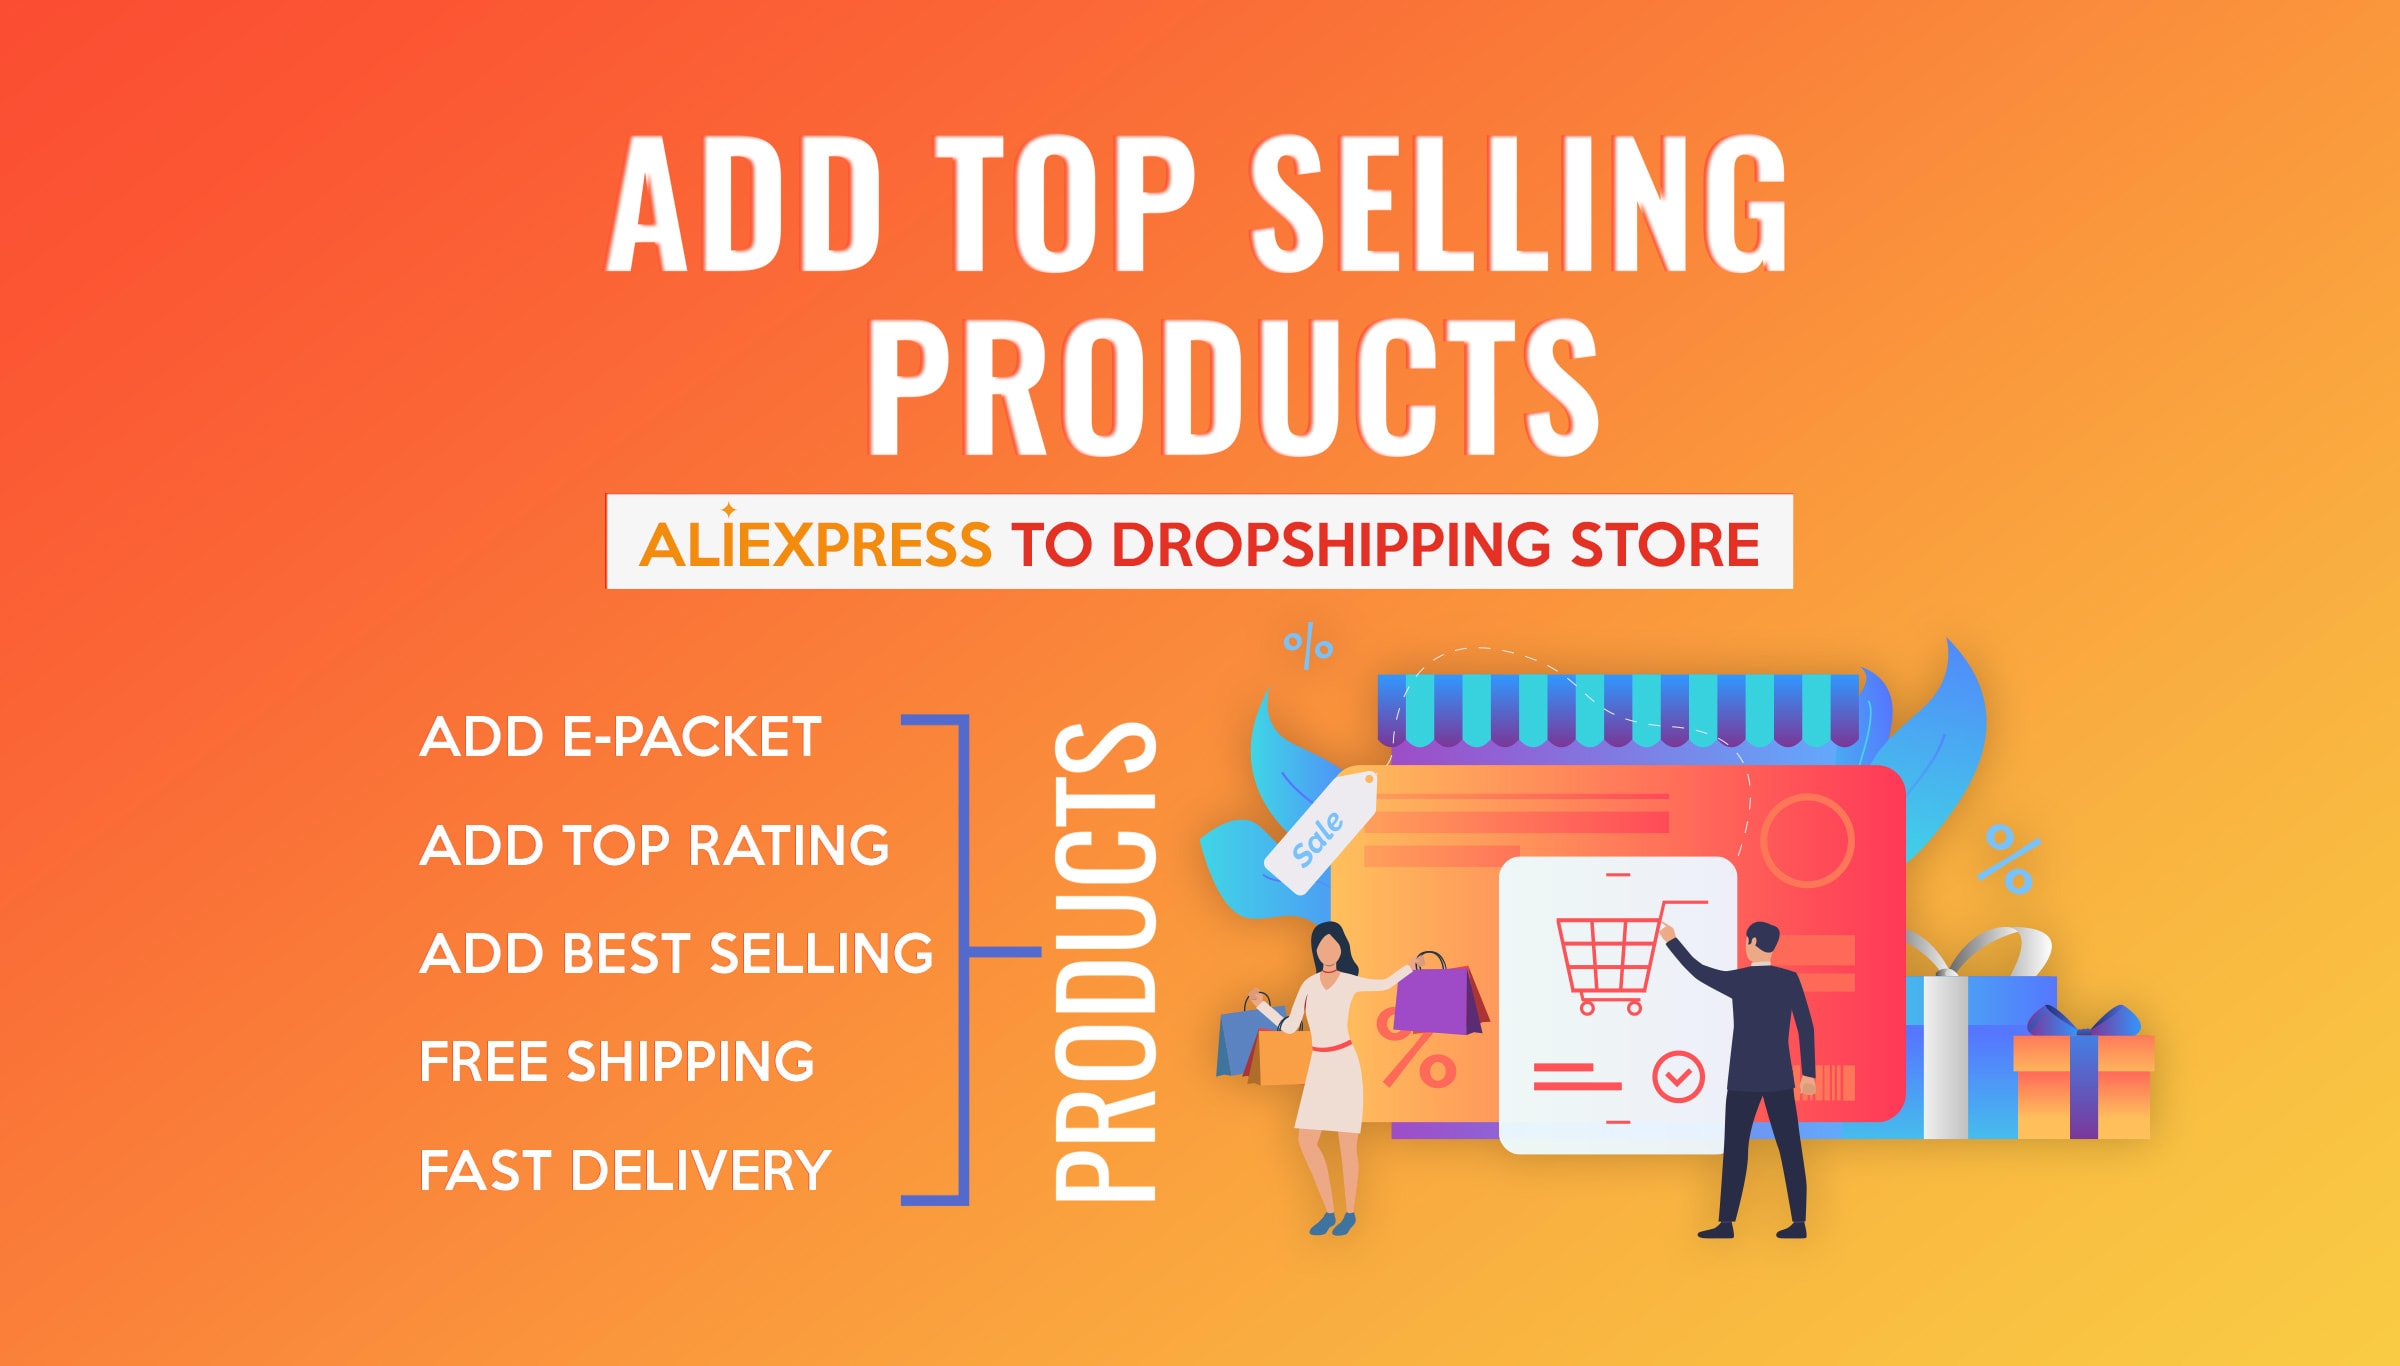 Add top selling aliexpress products by alidropship by Frelancer_soaib |  Fiverr